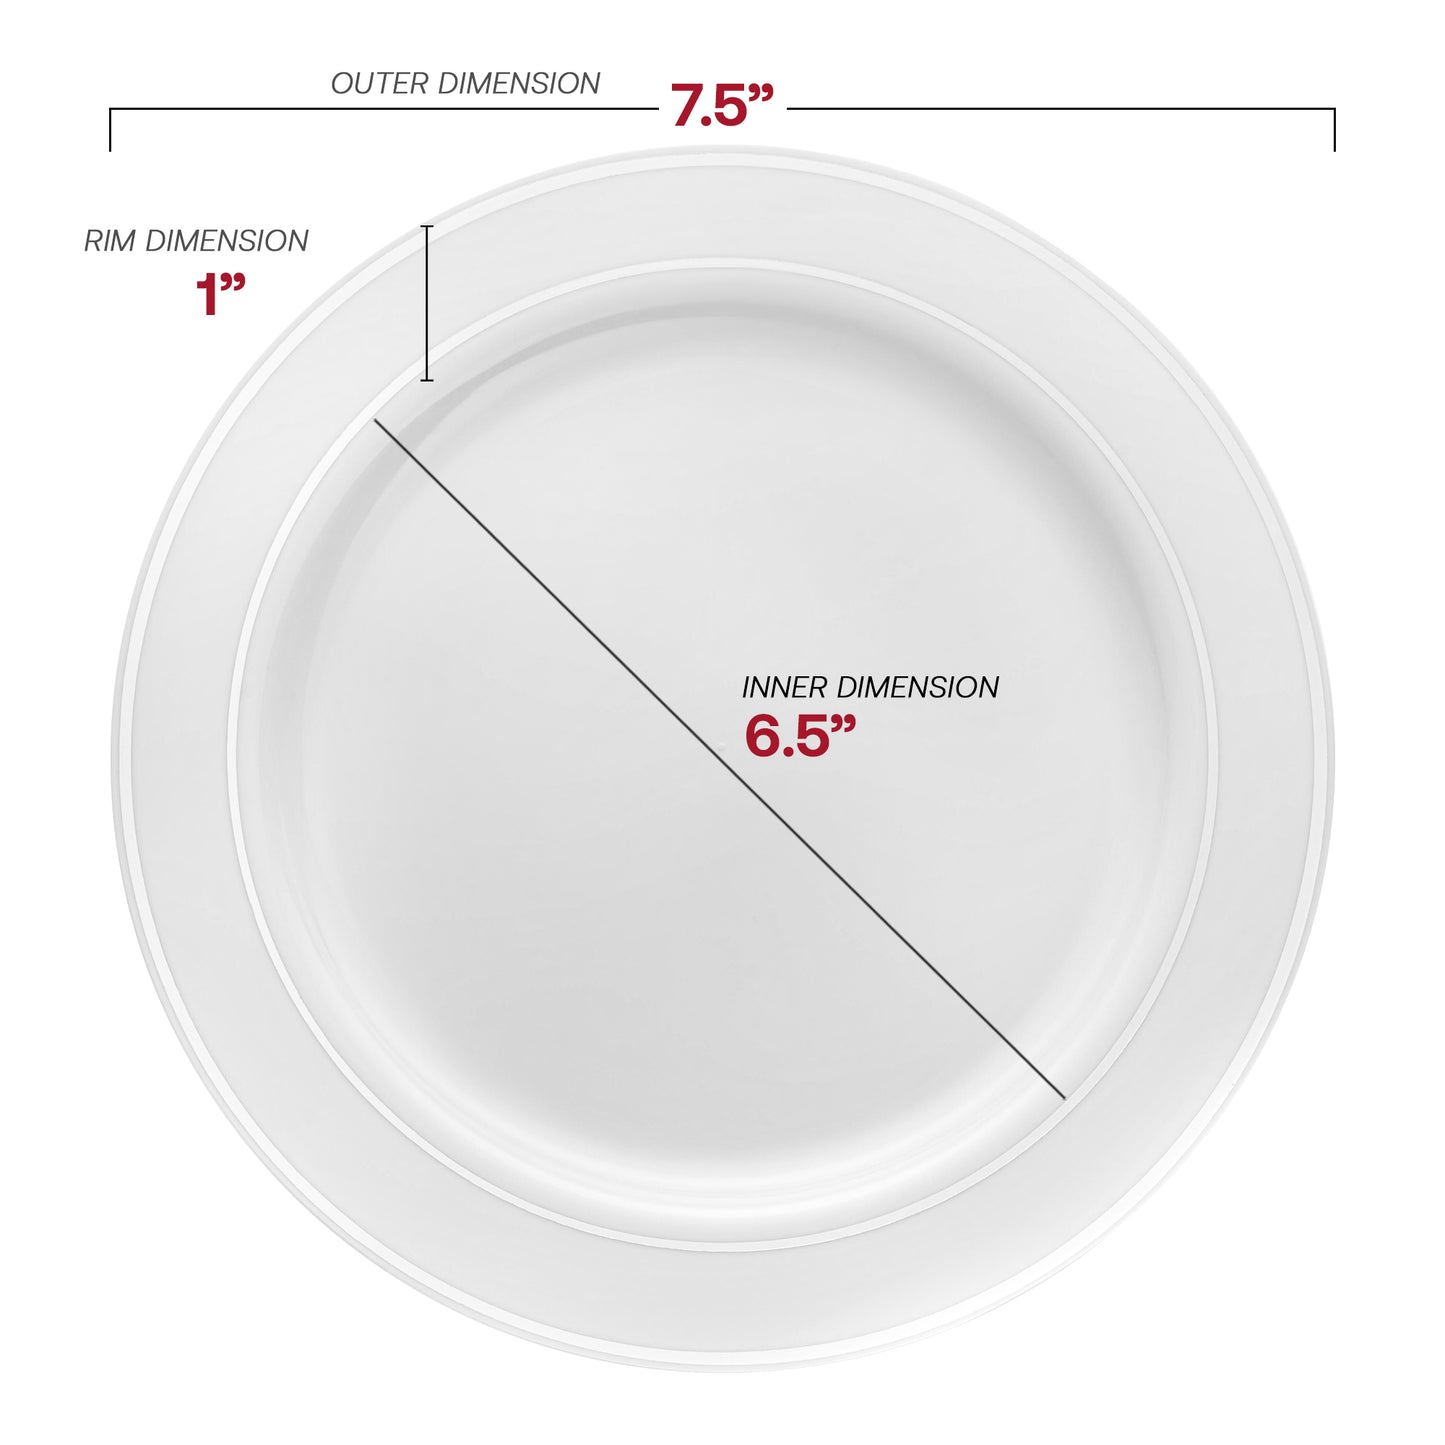 White with Silver Edge Rim Plastic Appetizer/Salad Plates (7.5") Dimension | The Kaya Collection